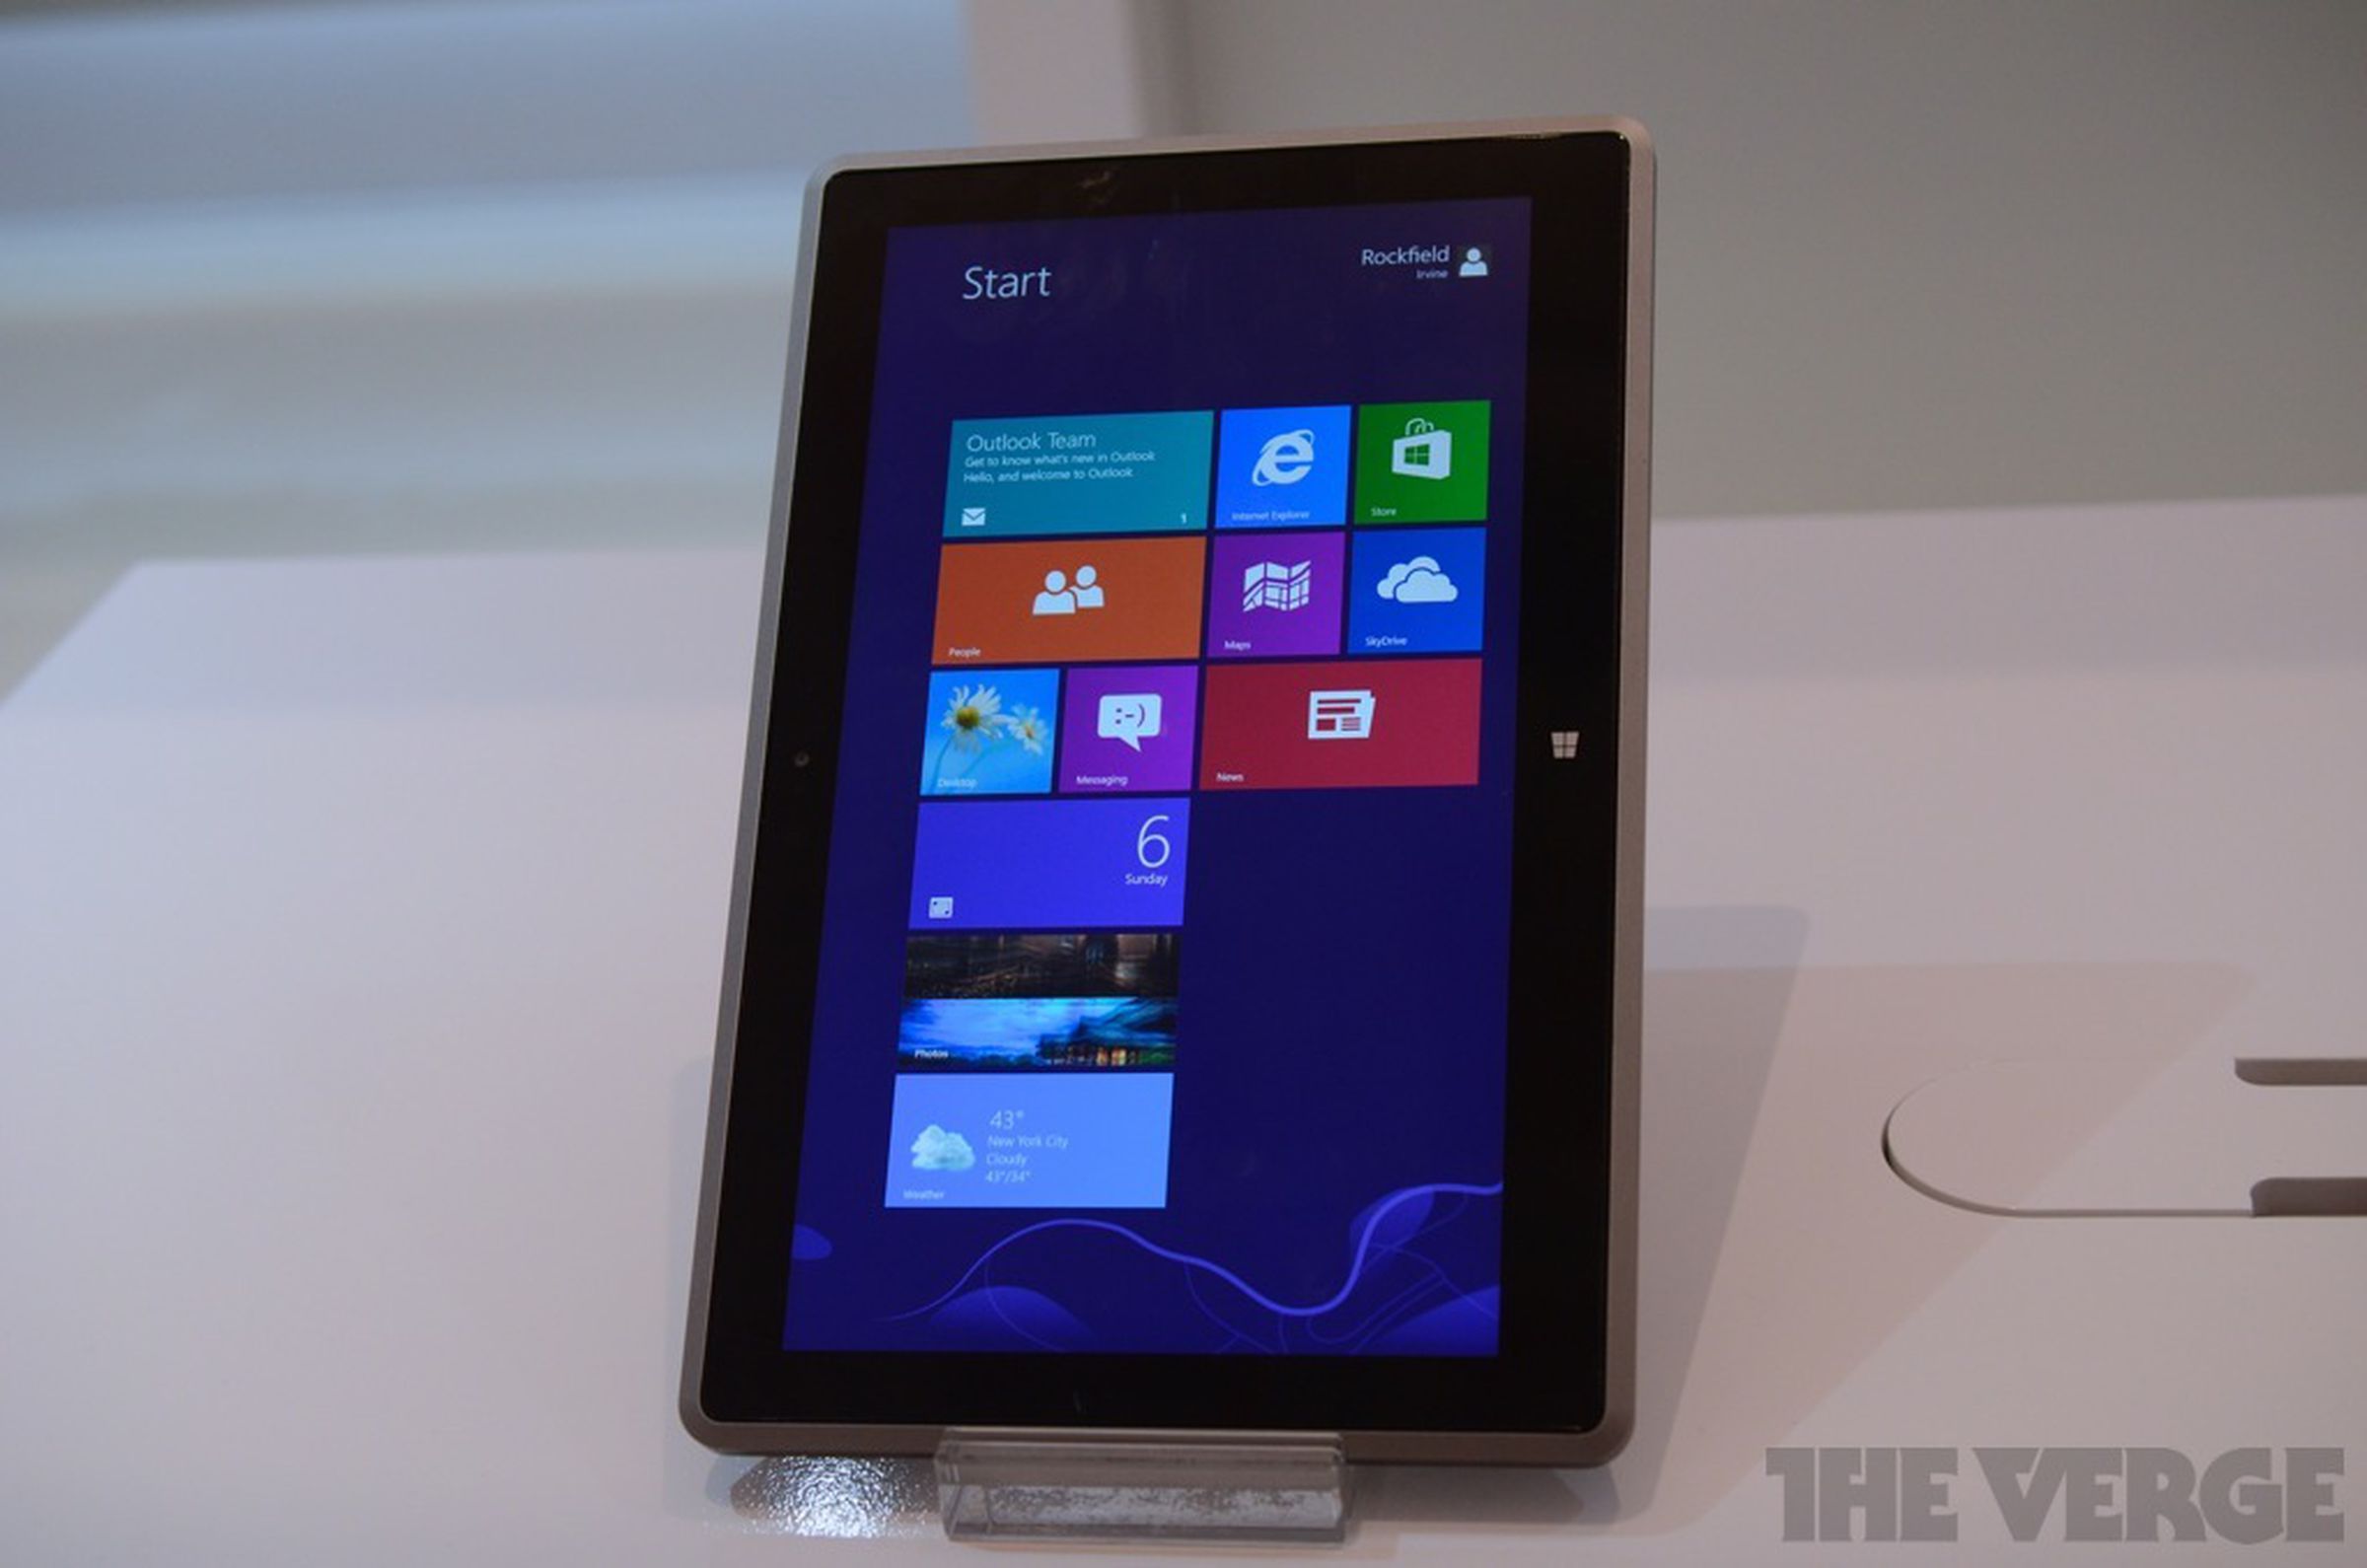 Vizio 11.6-inch Tablet with Windows 8 hands-on photos